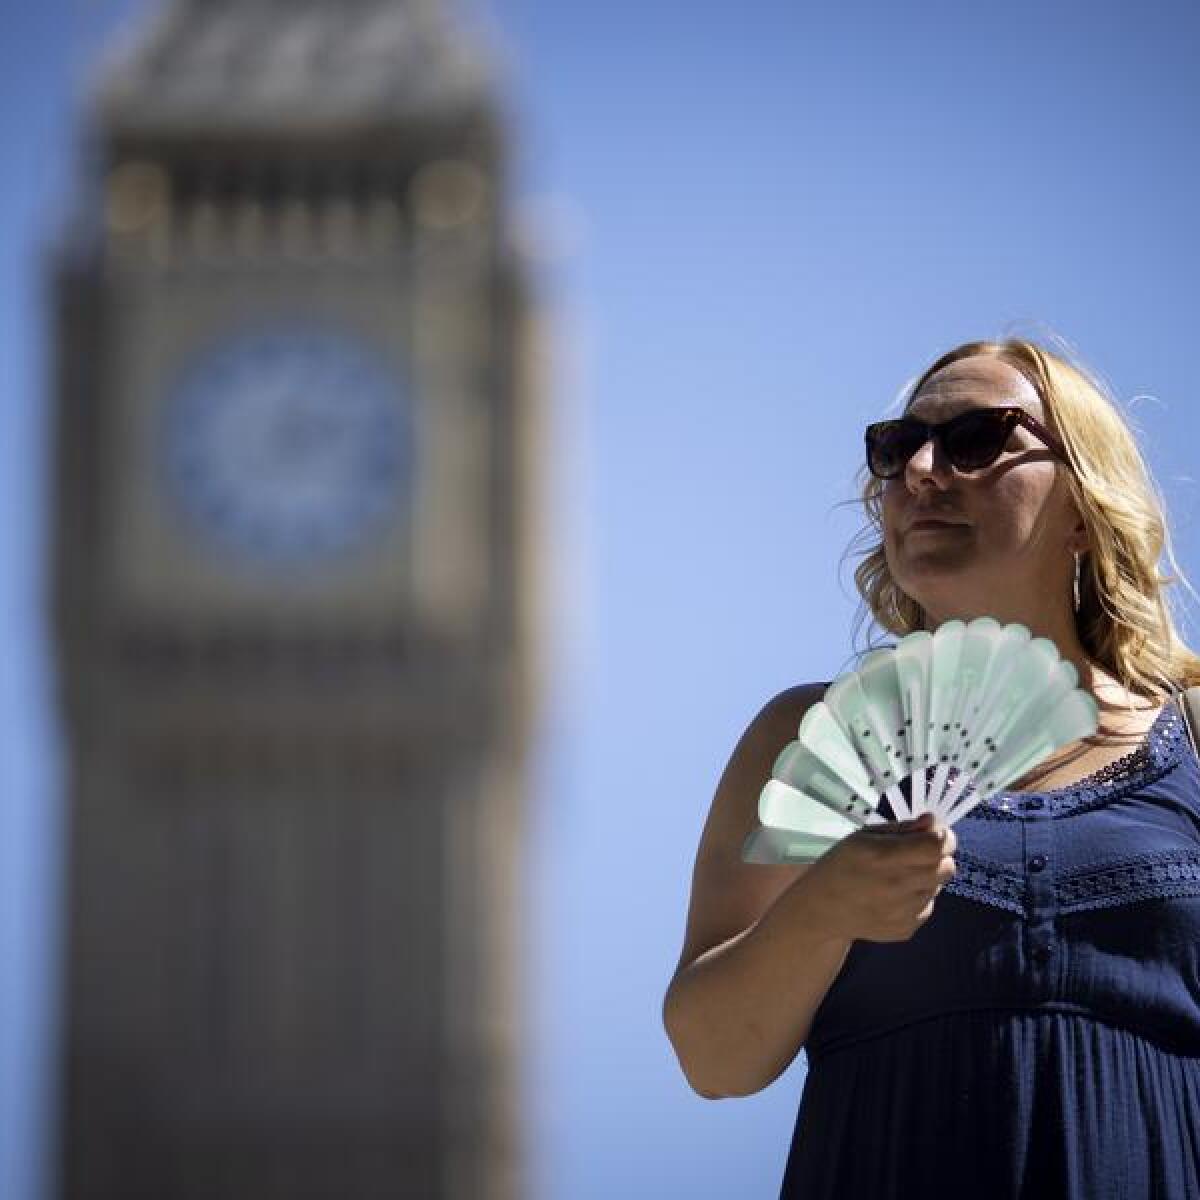 A tourist uses a fan to cool off in Westminster, London, Britain